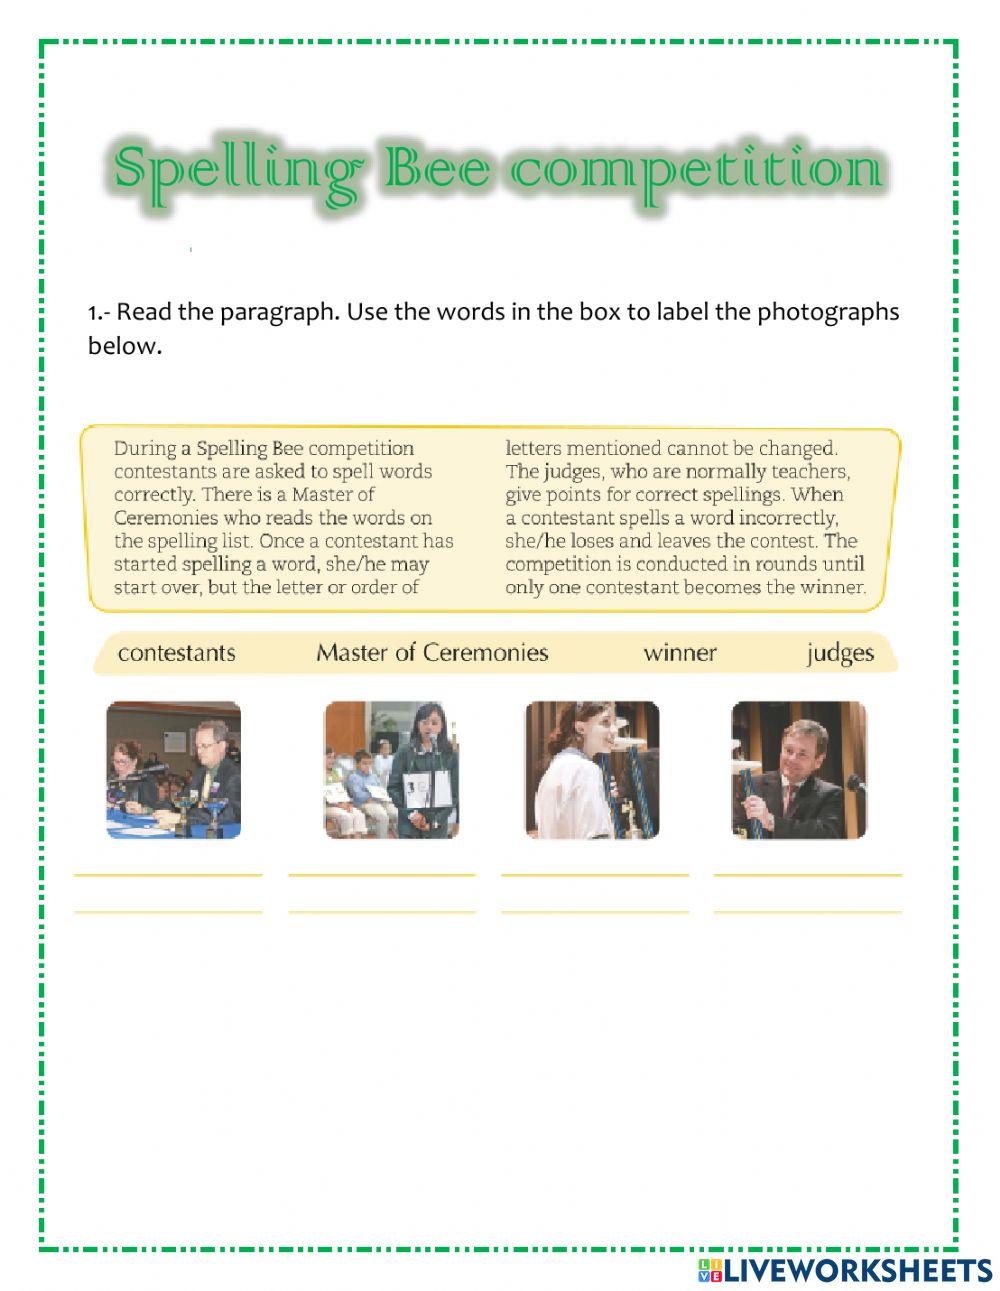 Spelling Bee competititon